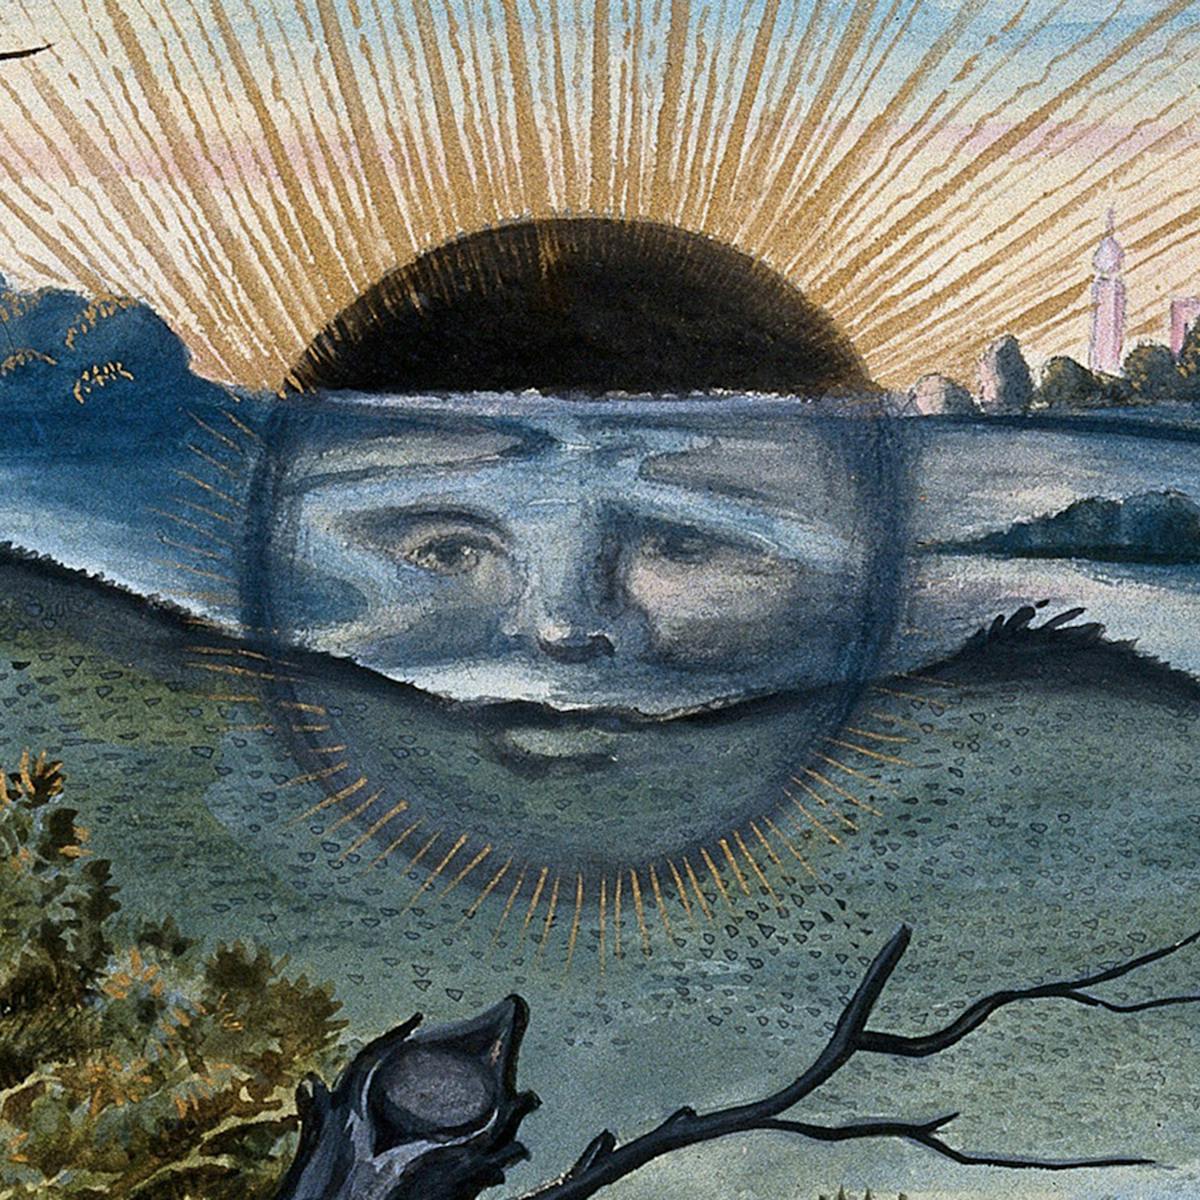 A black sun with a face descends behind the horizon of a marshy landscape